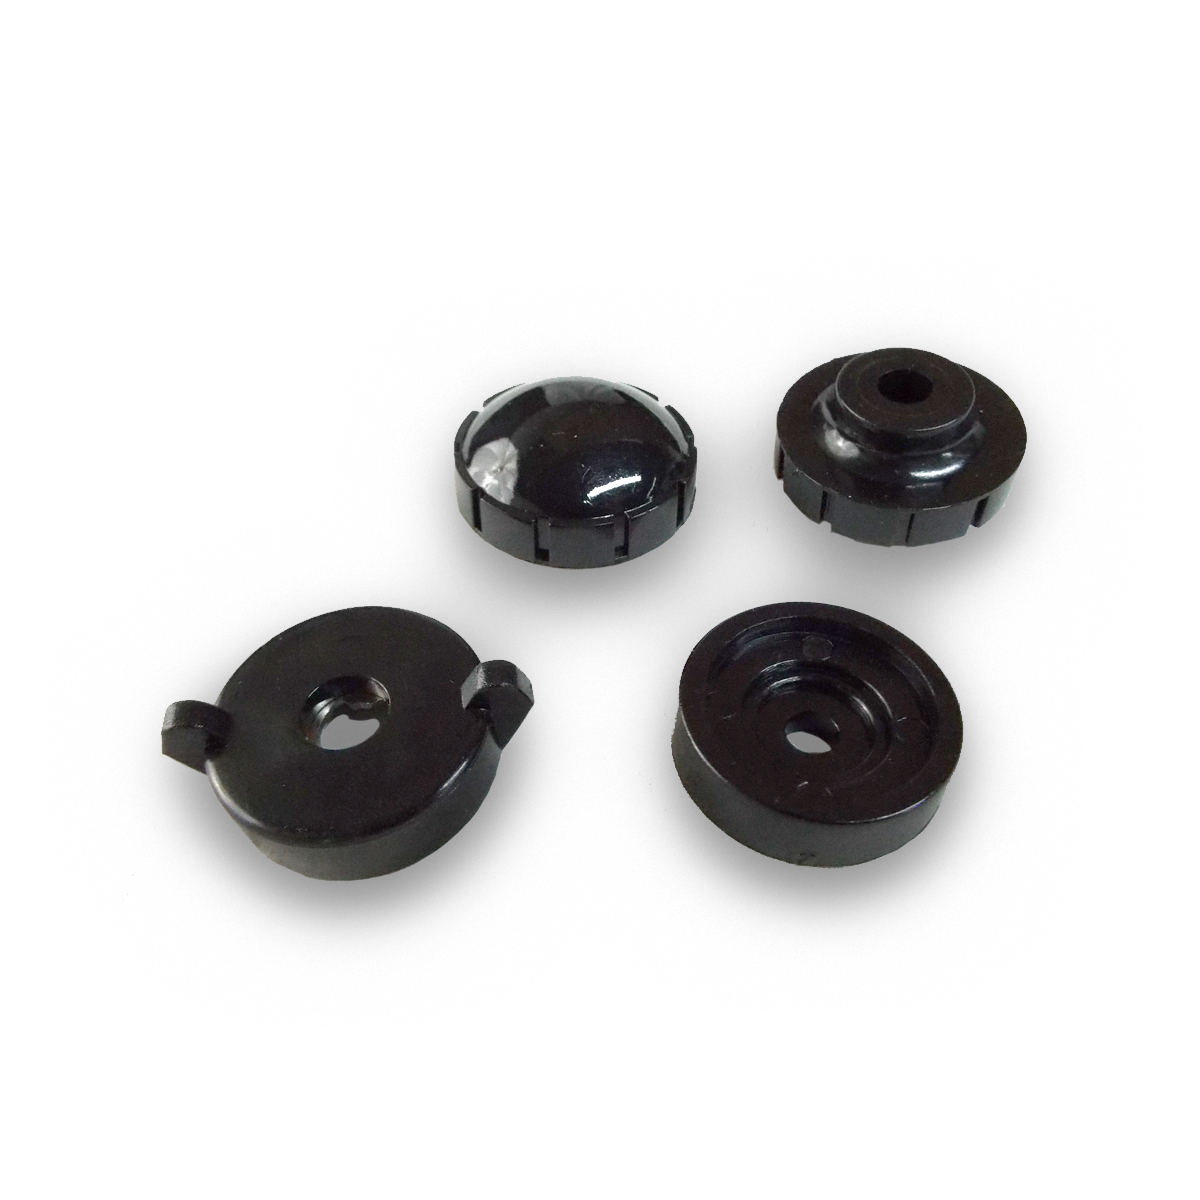 1954-Early 1955 Radio Tuning Knobs Black Set of 4 Chevrolet and GMC Pickup Truck